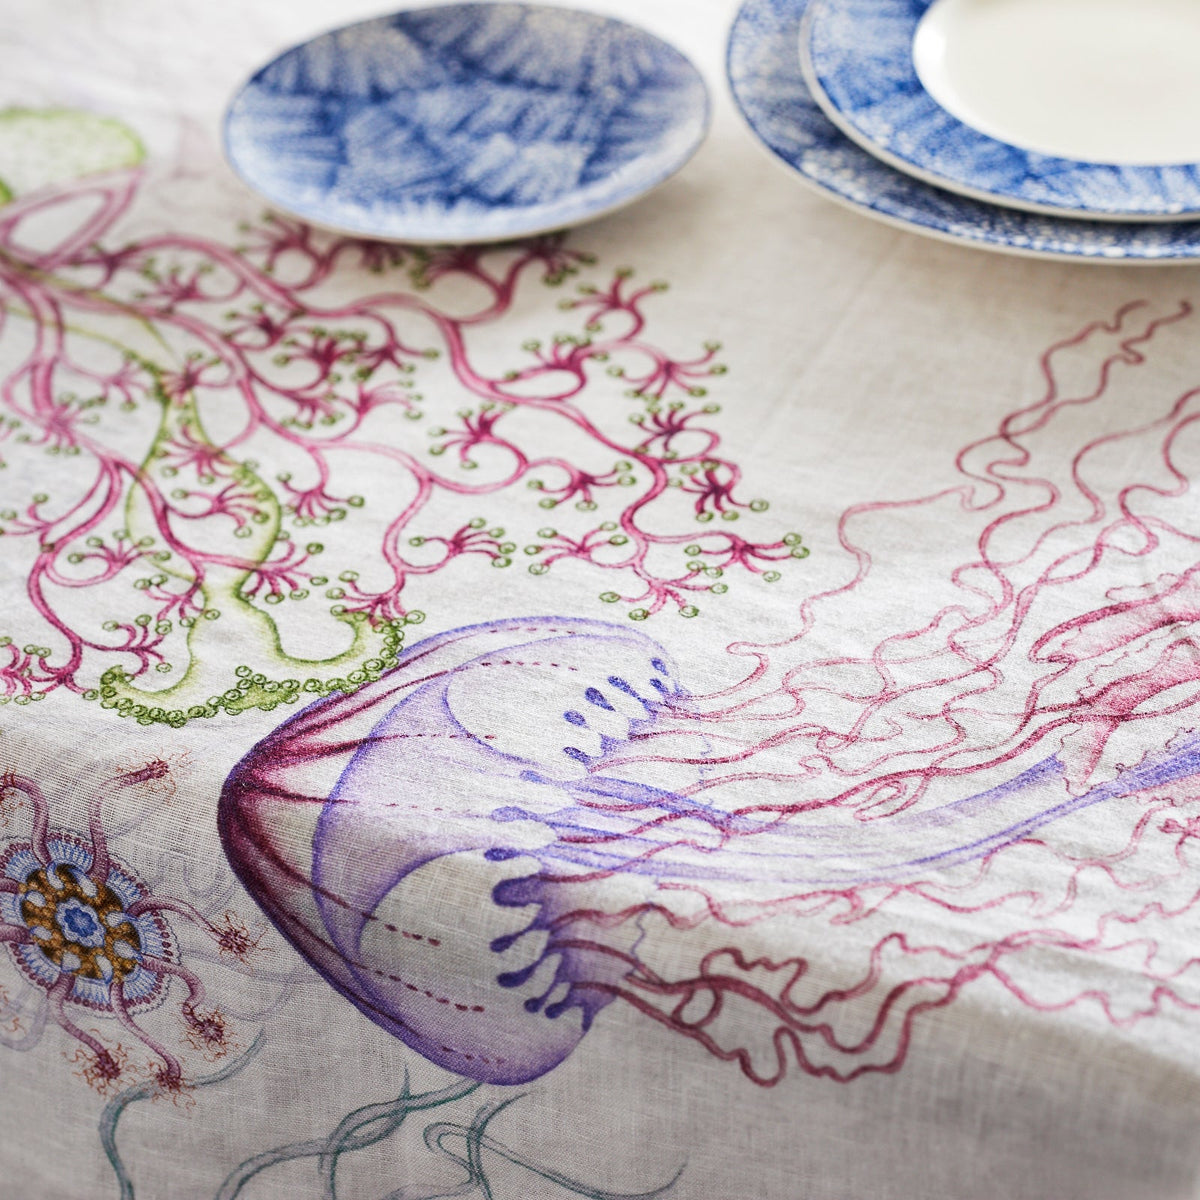 Jellyfish Detail from the Reef Linen Tablecloth featuring watercolor Shells, Jellyfish, Coral, Seahorses from Caskata